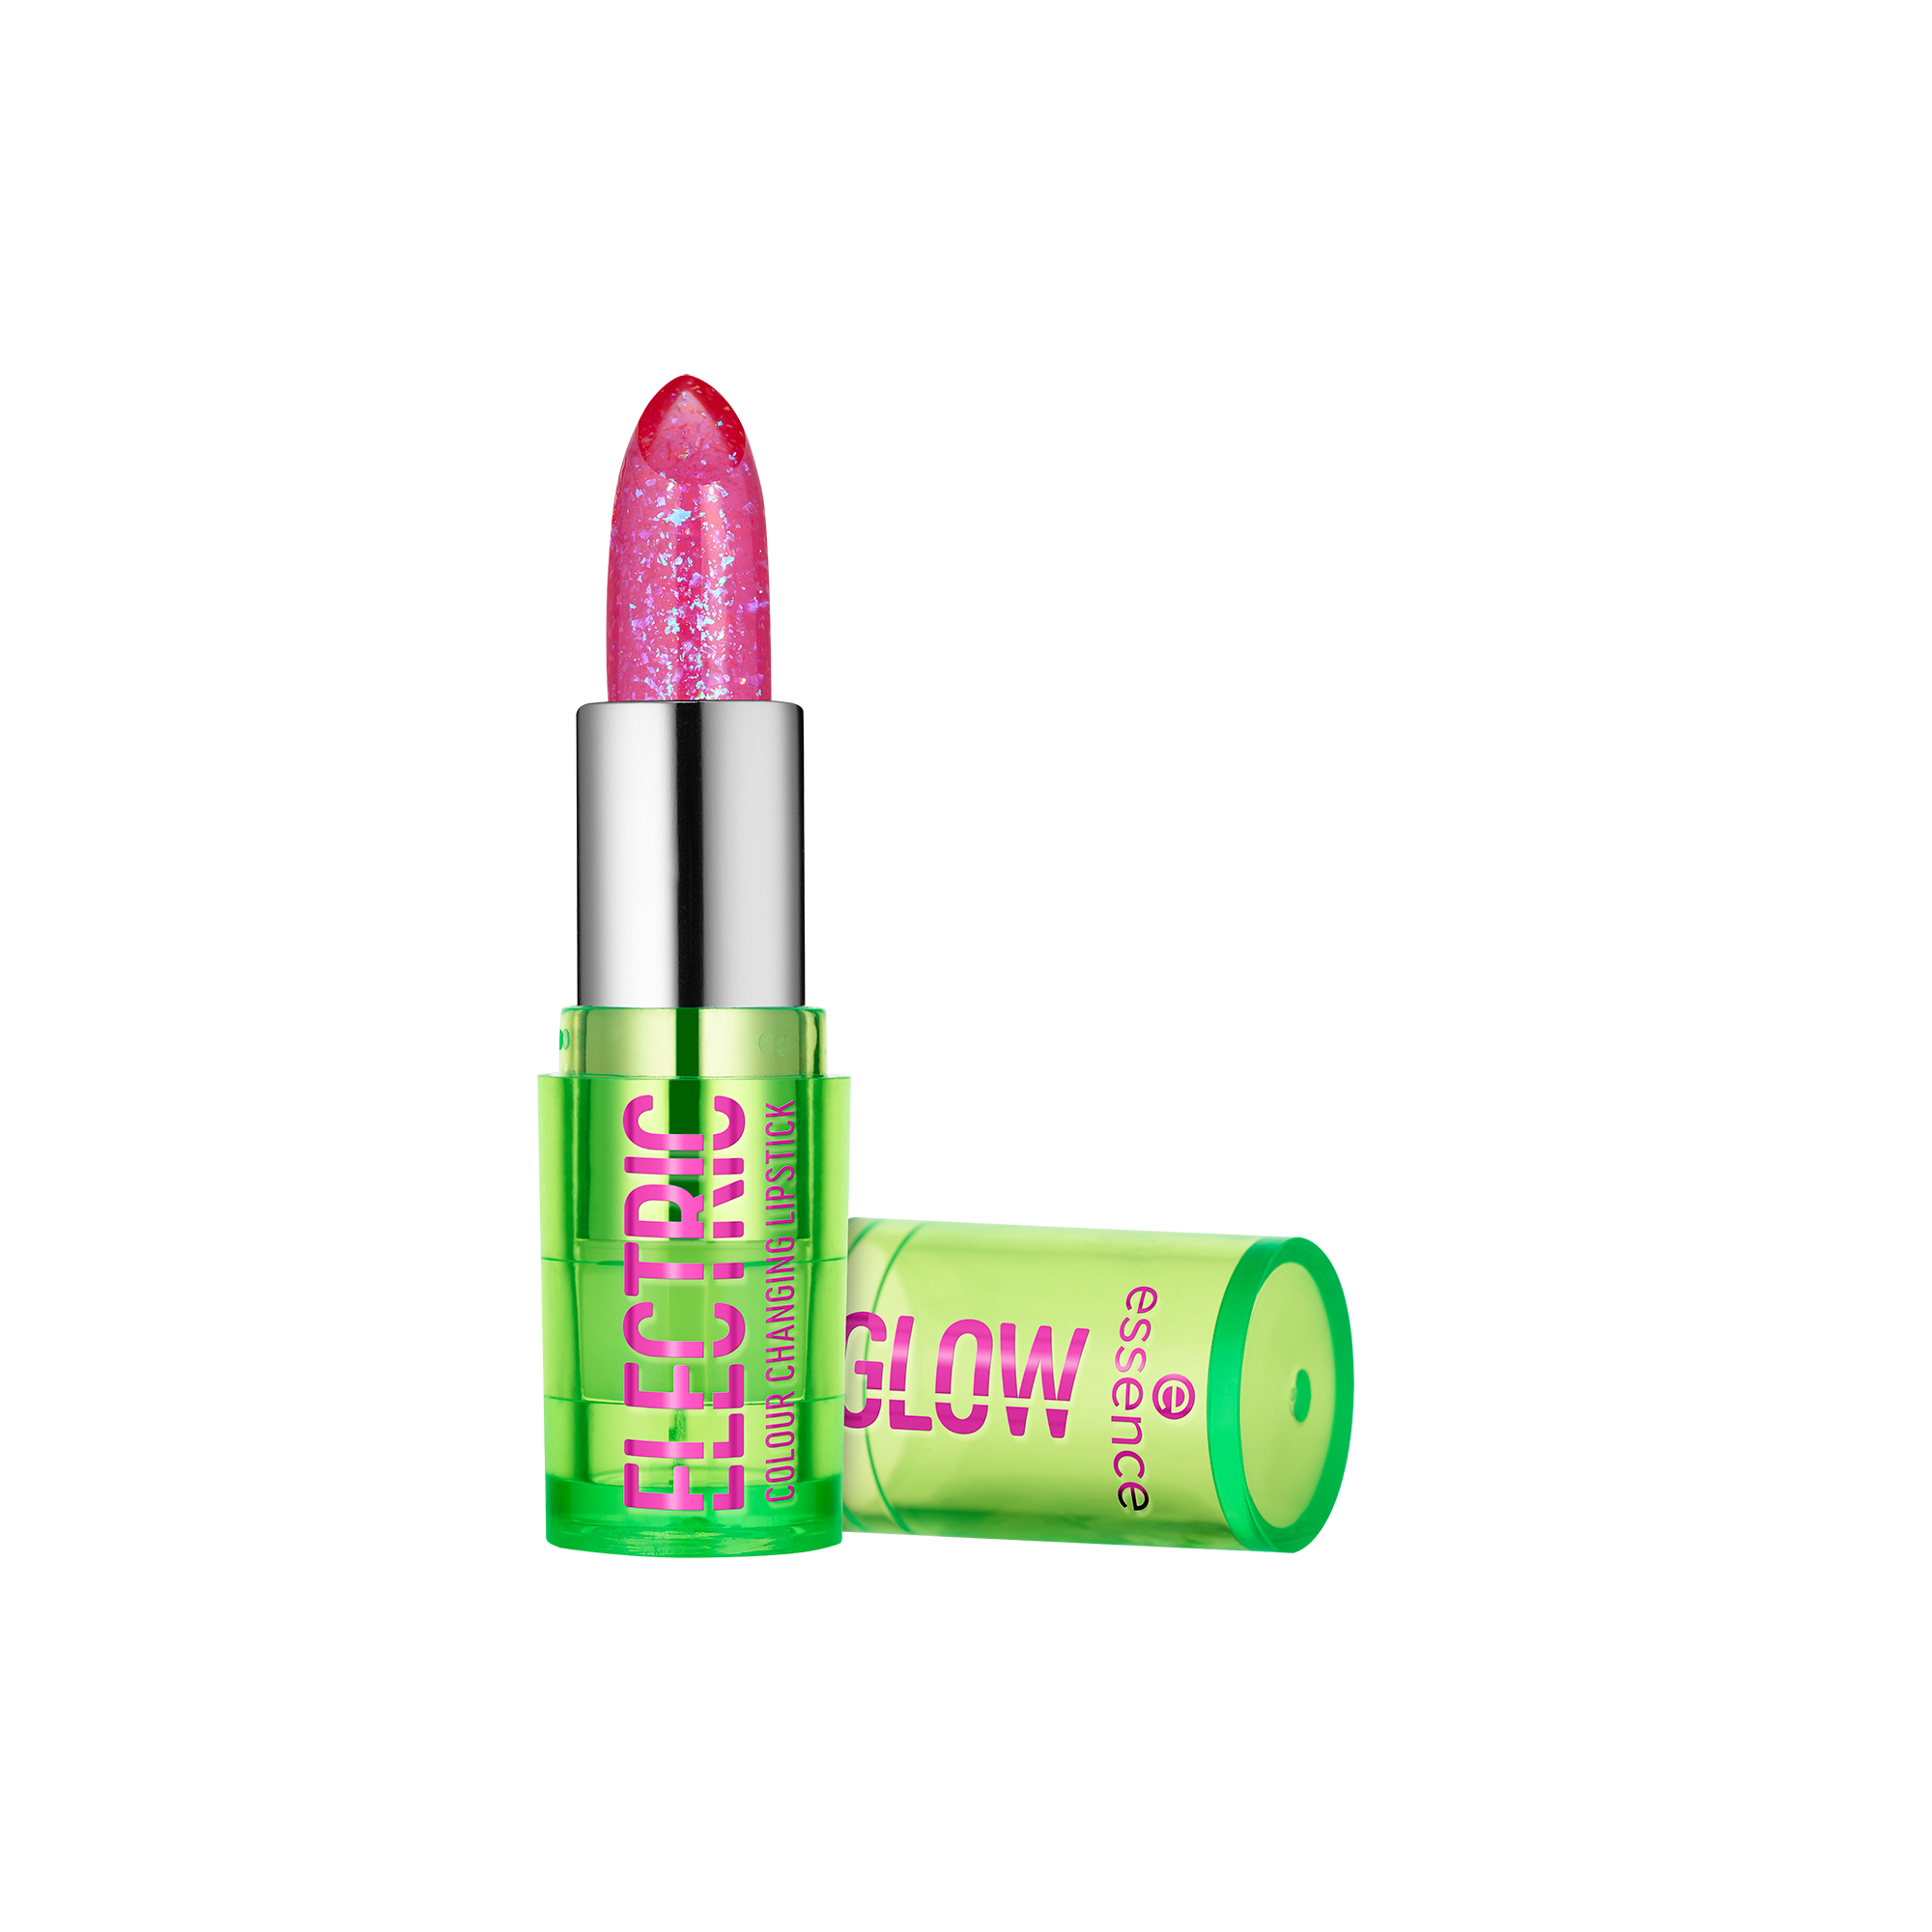 ELECTRIC GLOW colour changing rossetto